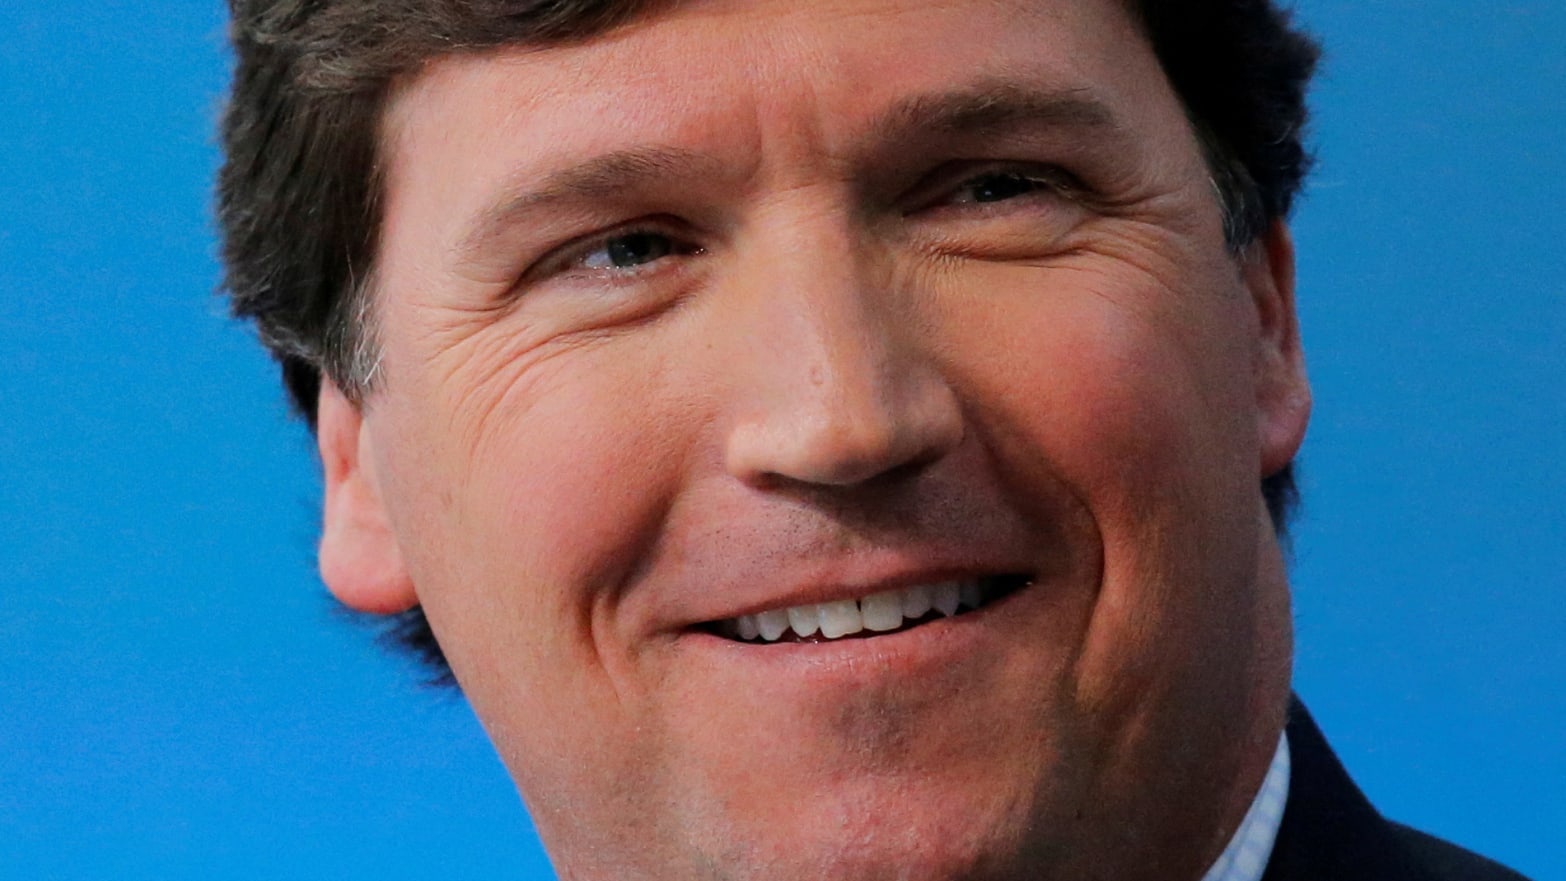 Fox personality Tucker Carlson speaks at a 2017 conference.